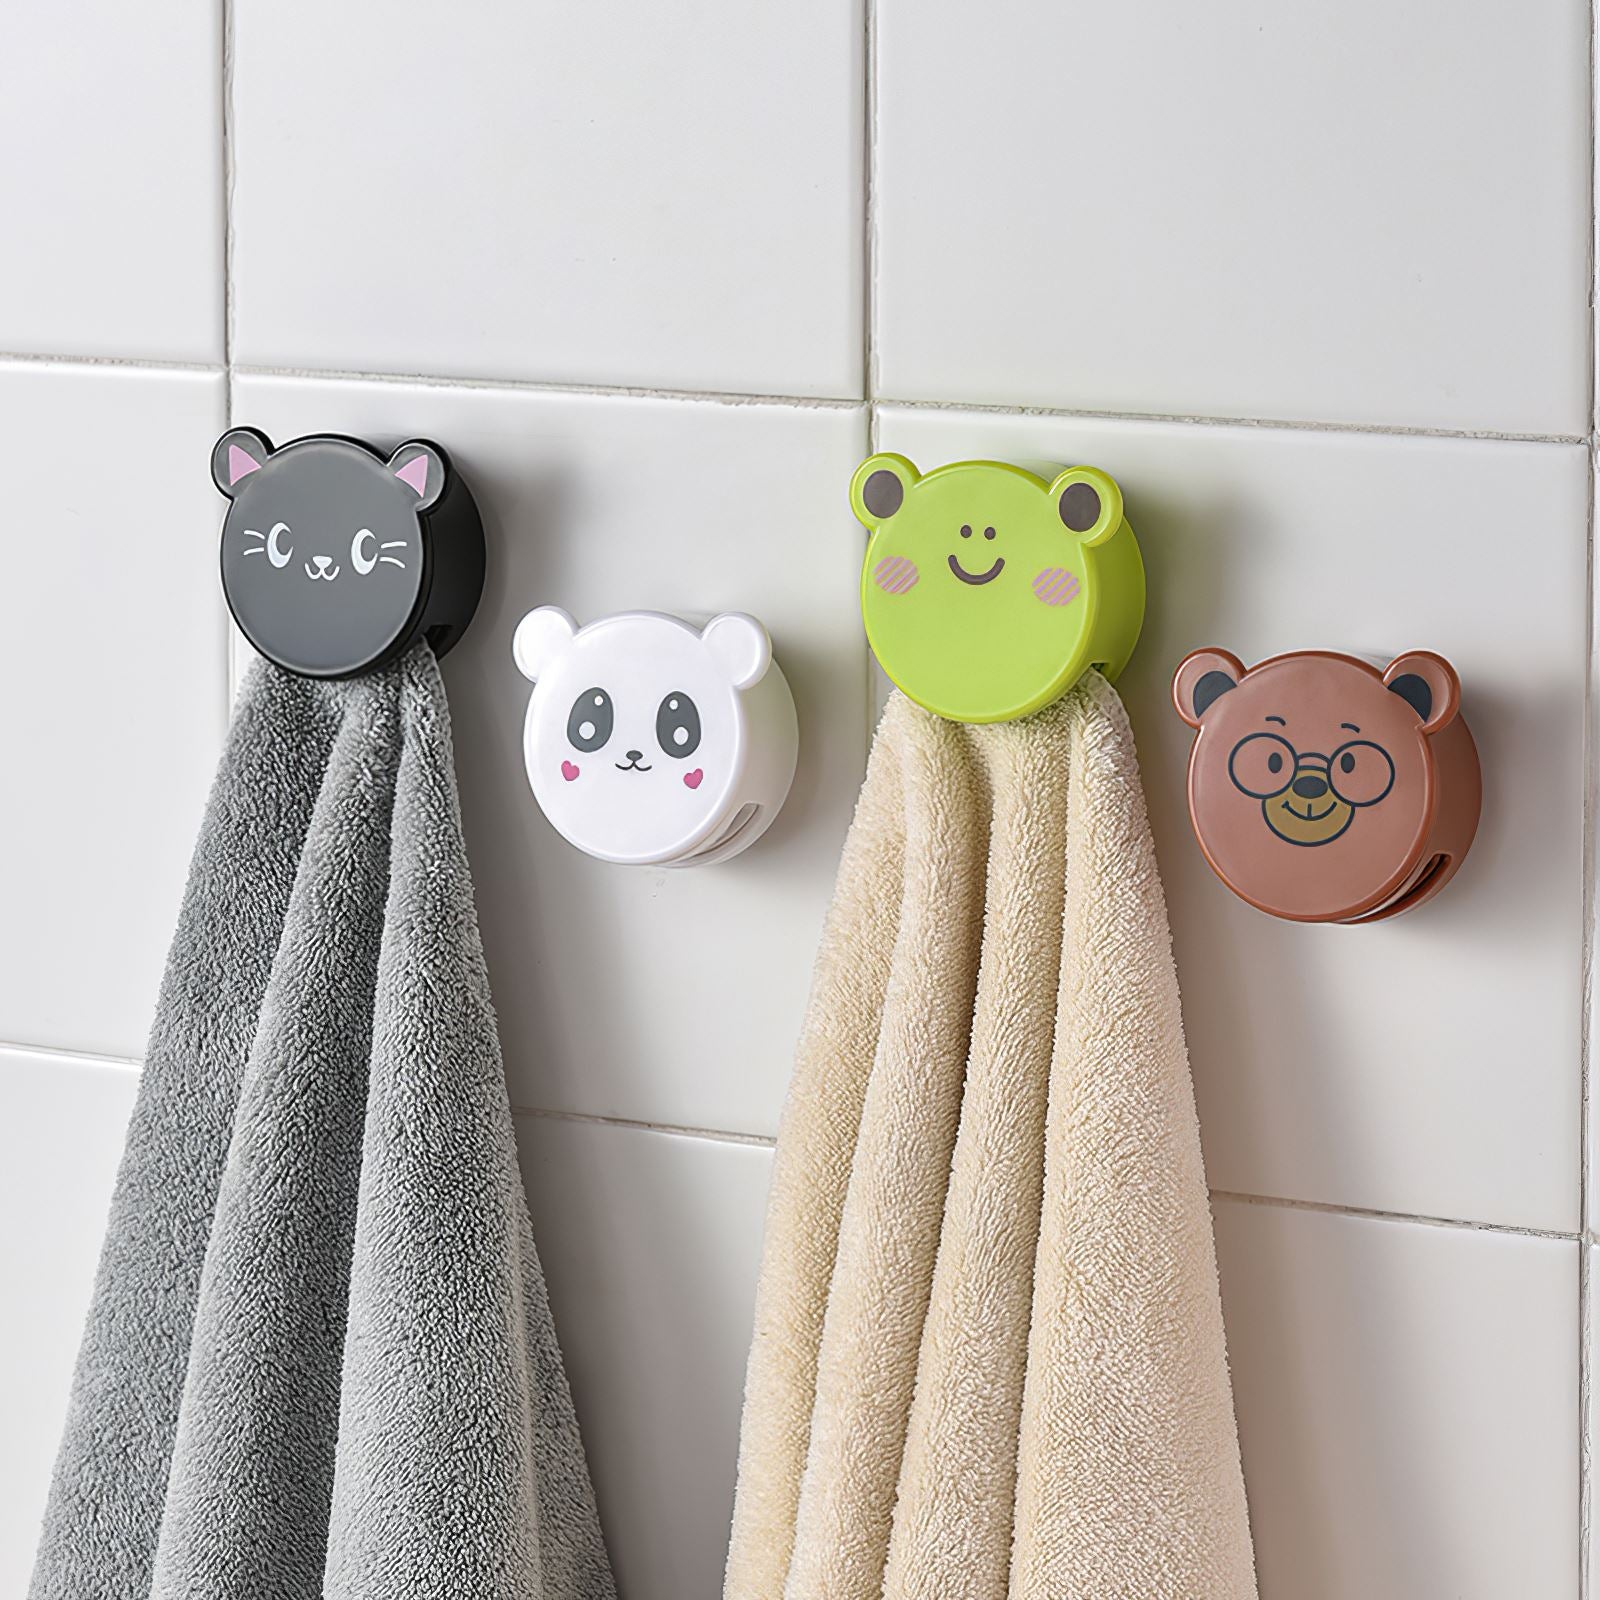 Towel holder with cartoon characters